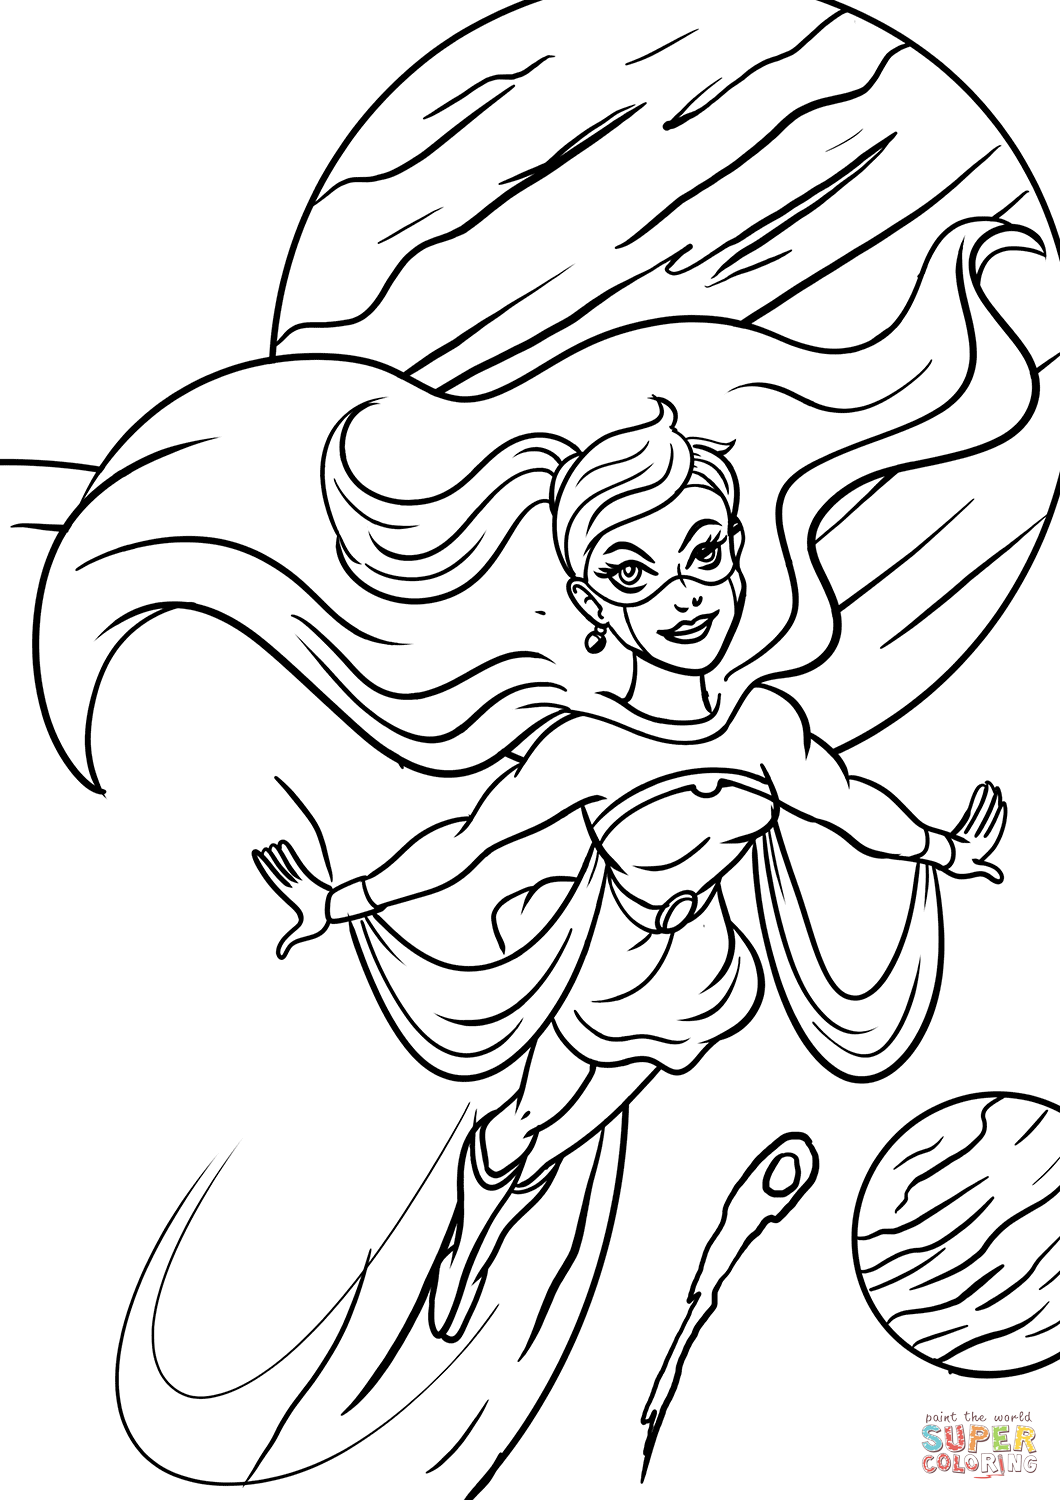 Supergirl coloring page free printable coloring pages